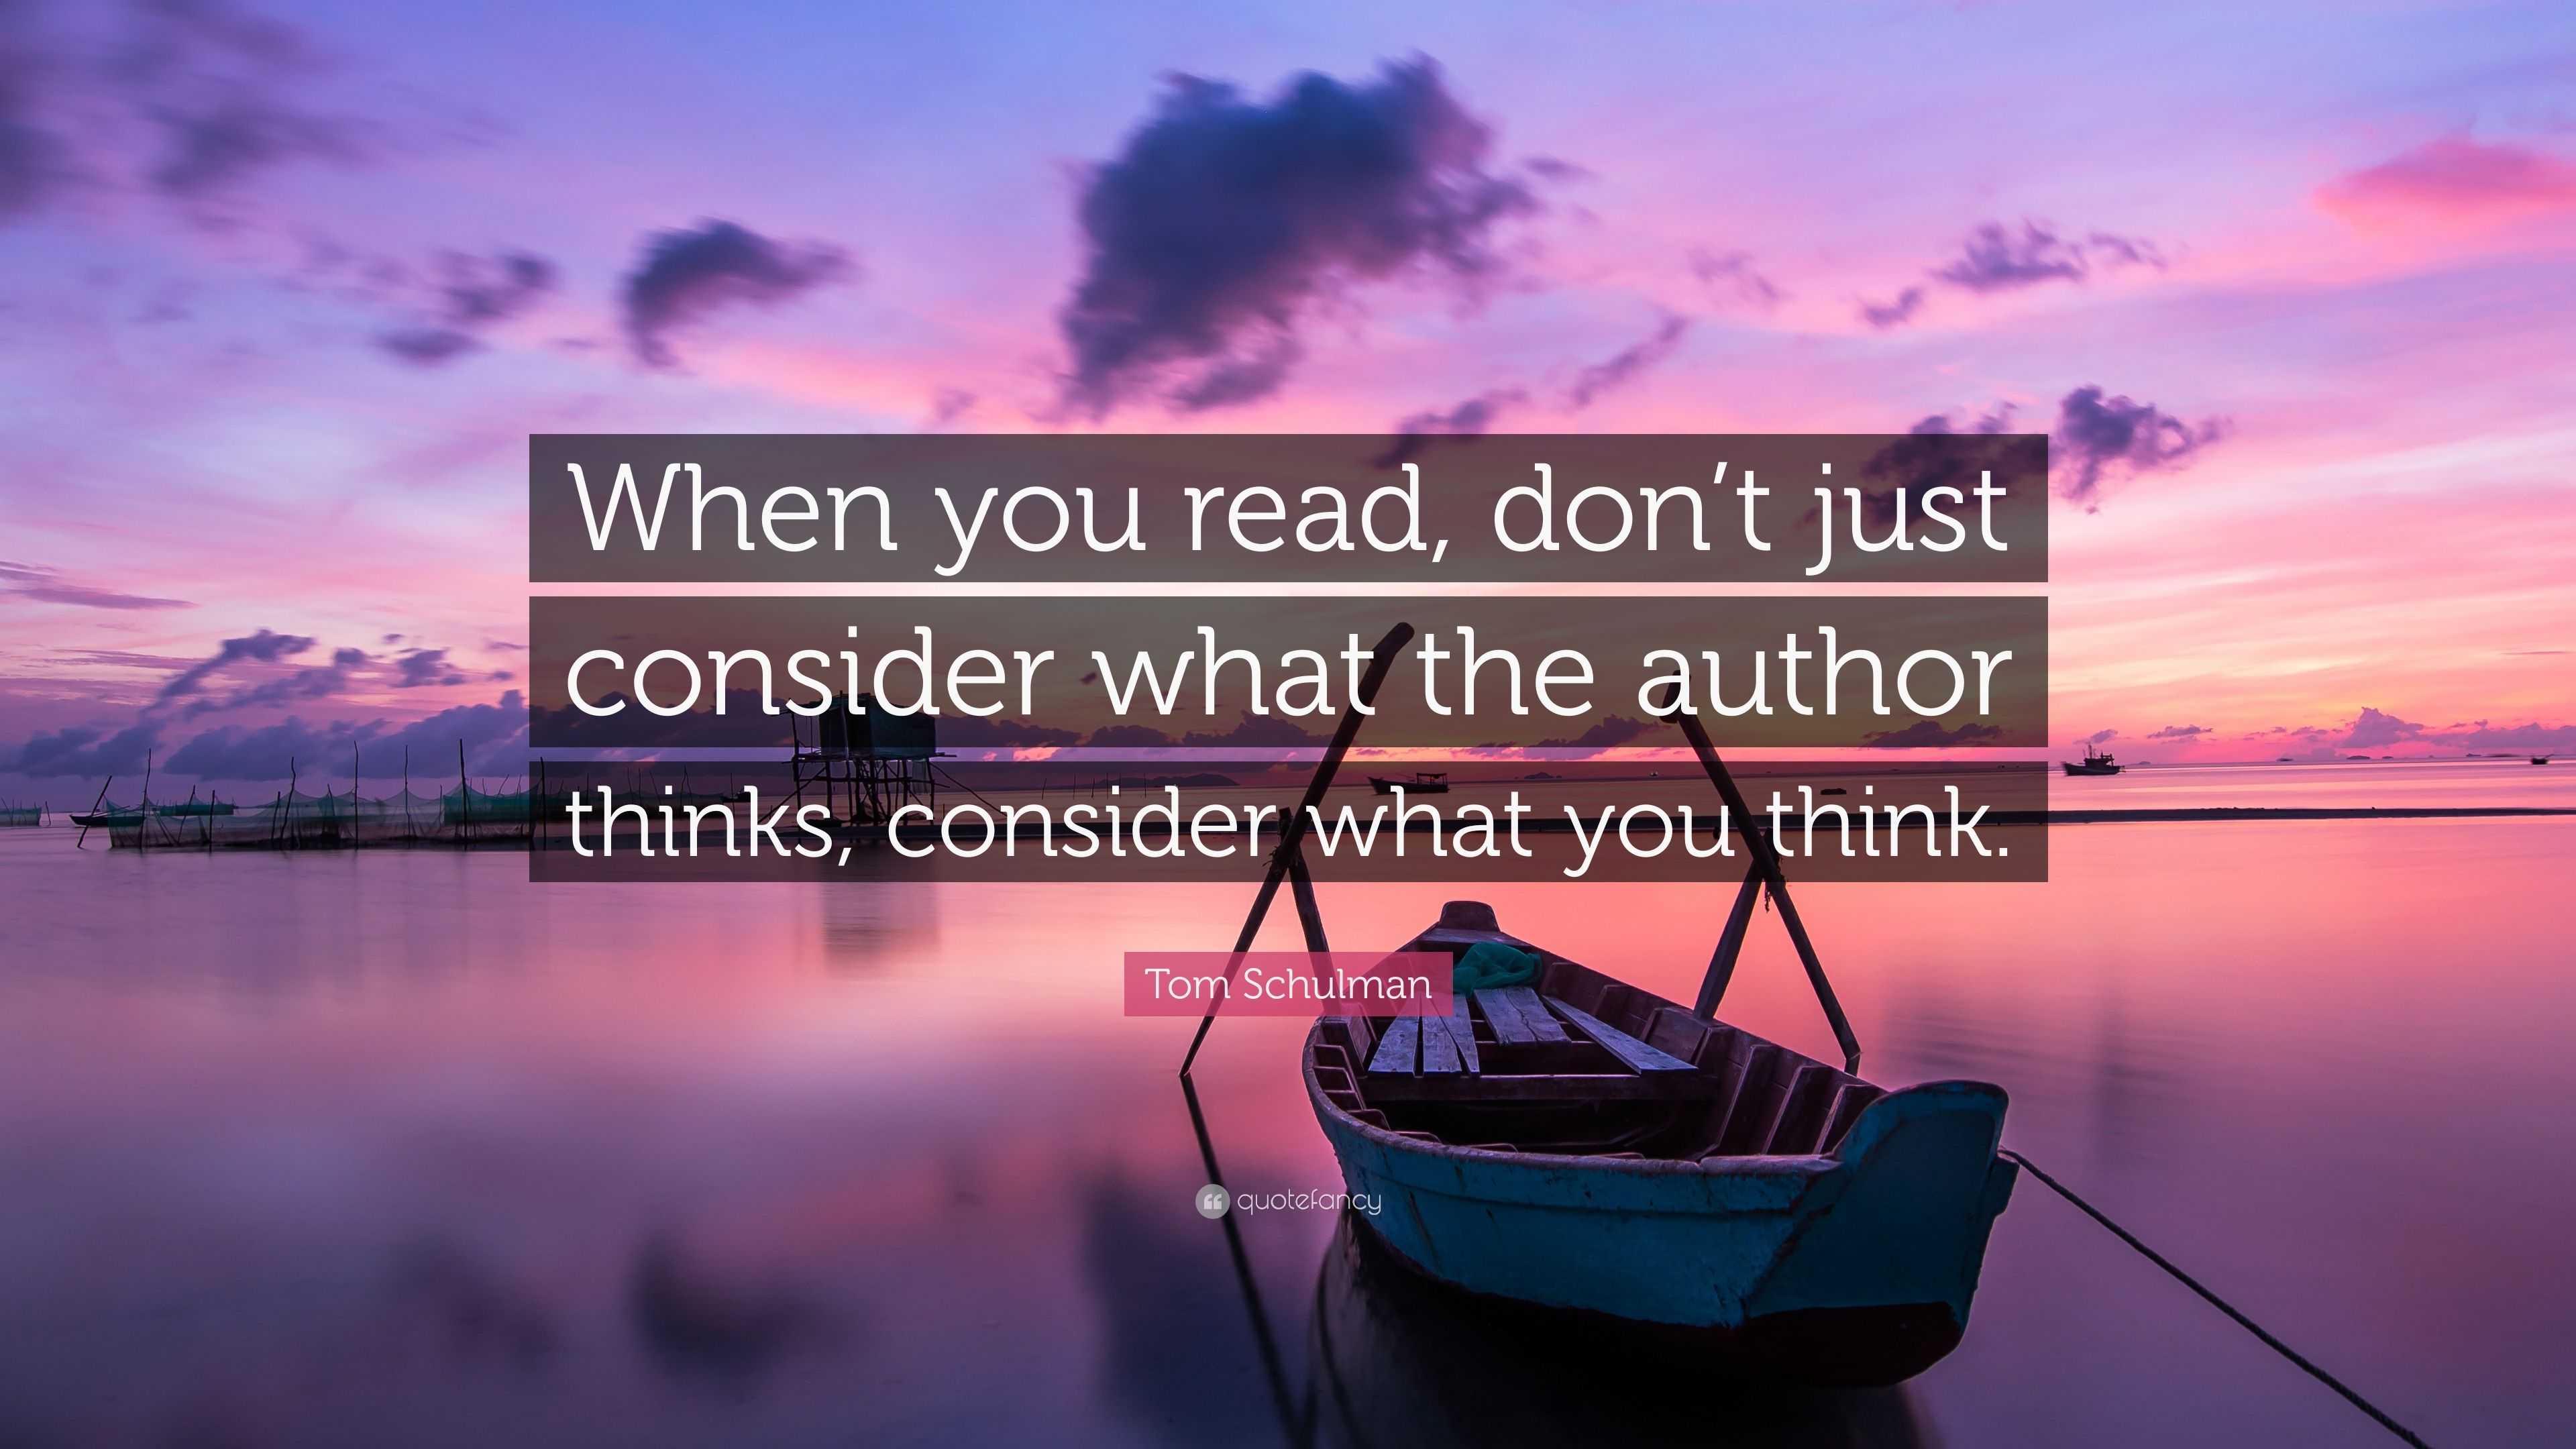 Tom Schulman Quote: “When you read, don’t just consider what the author ...